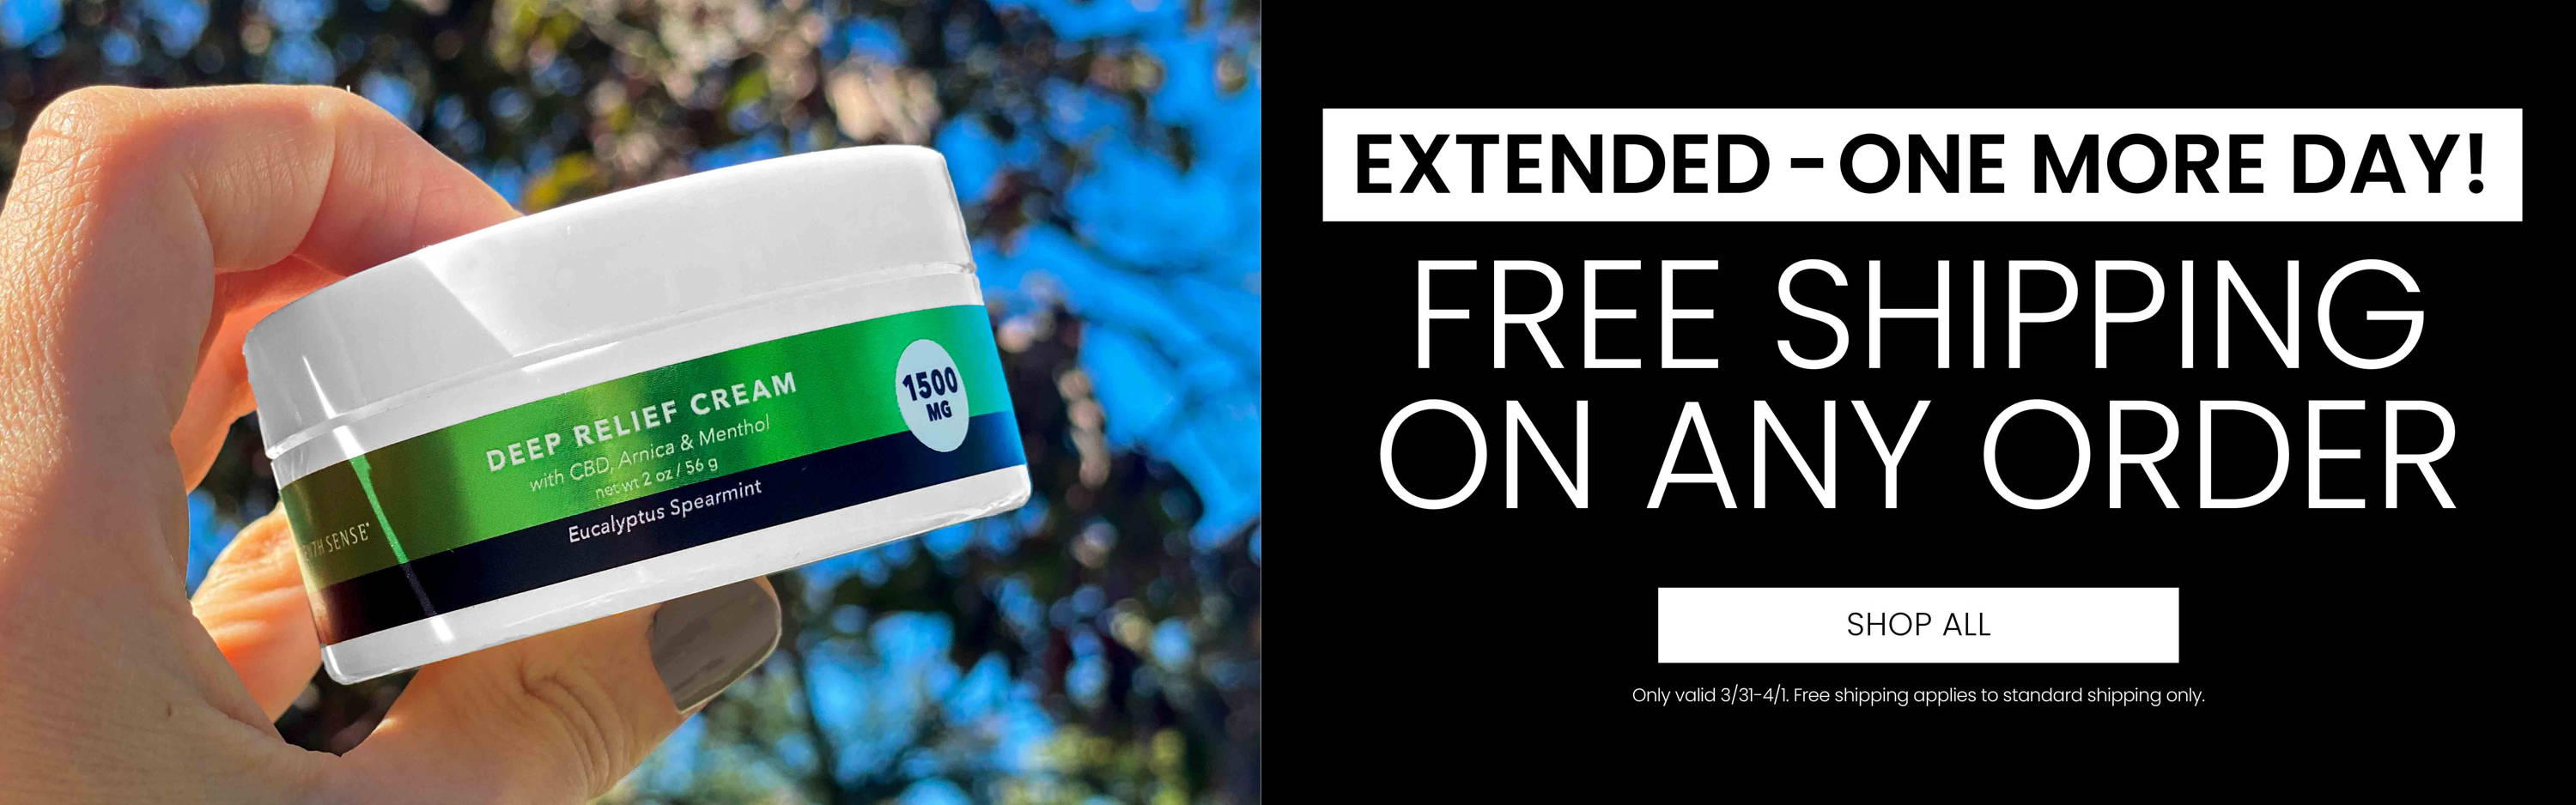 Extended - One More Day! Free Standard Shipping on Every Order.